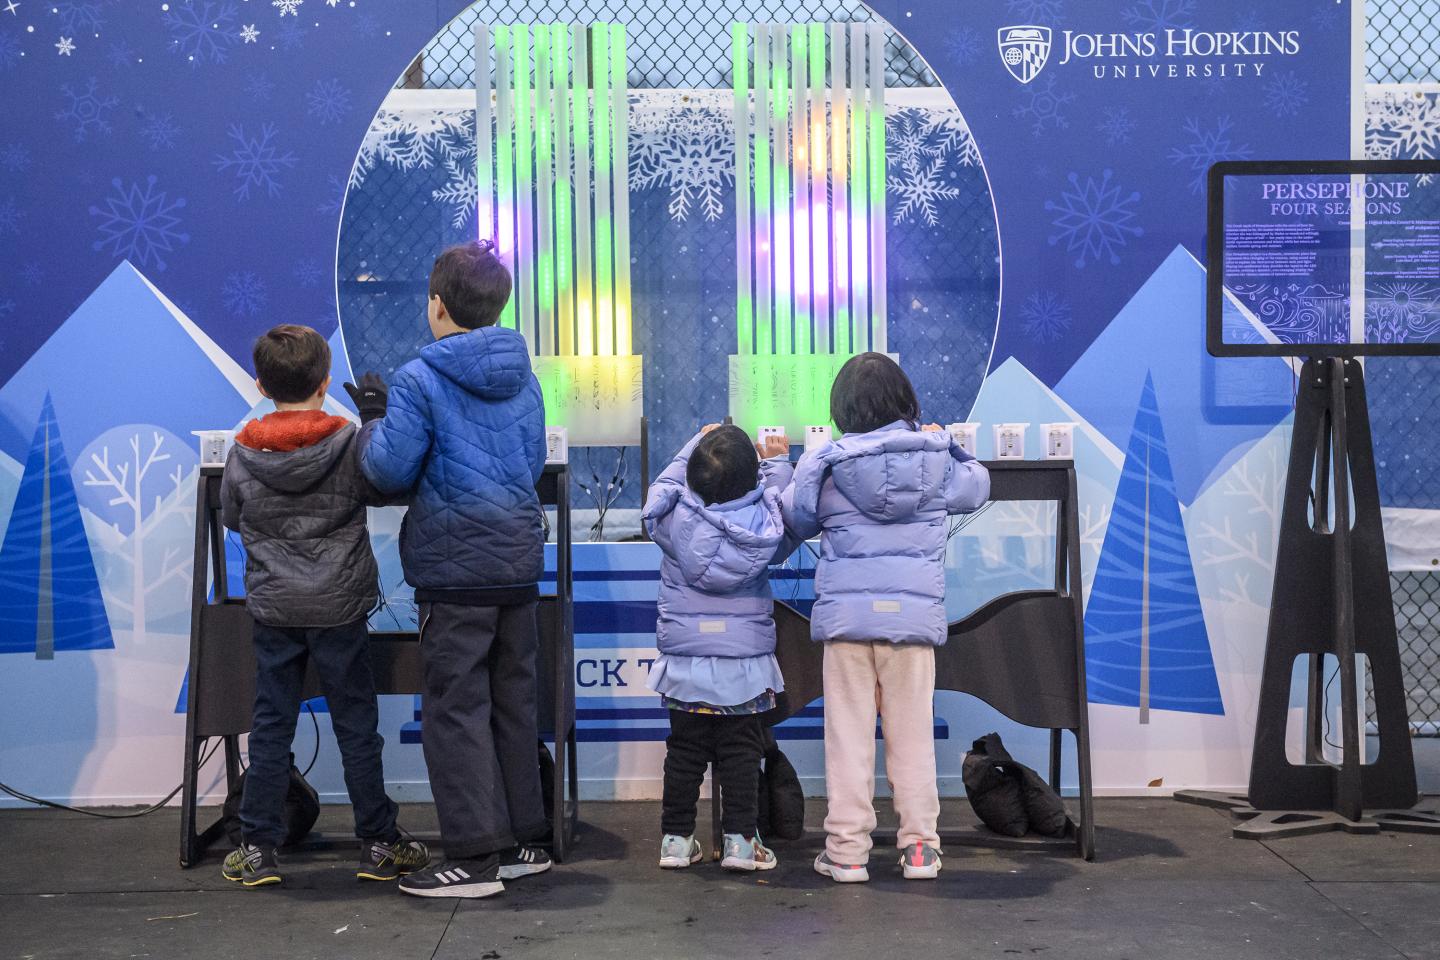 Children play with Persephone, a light and sound organ, at the ice rink in February 2023